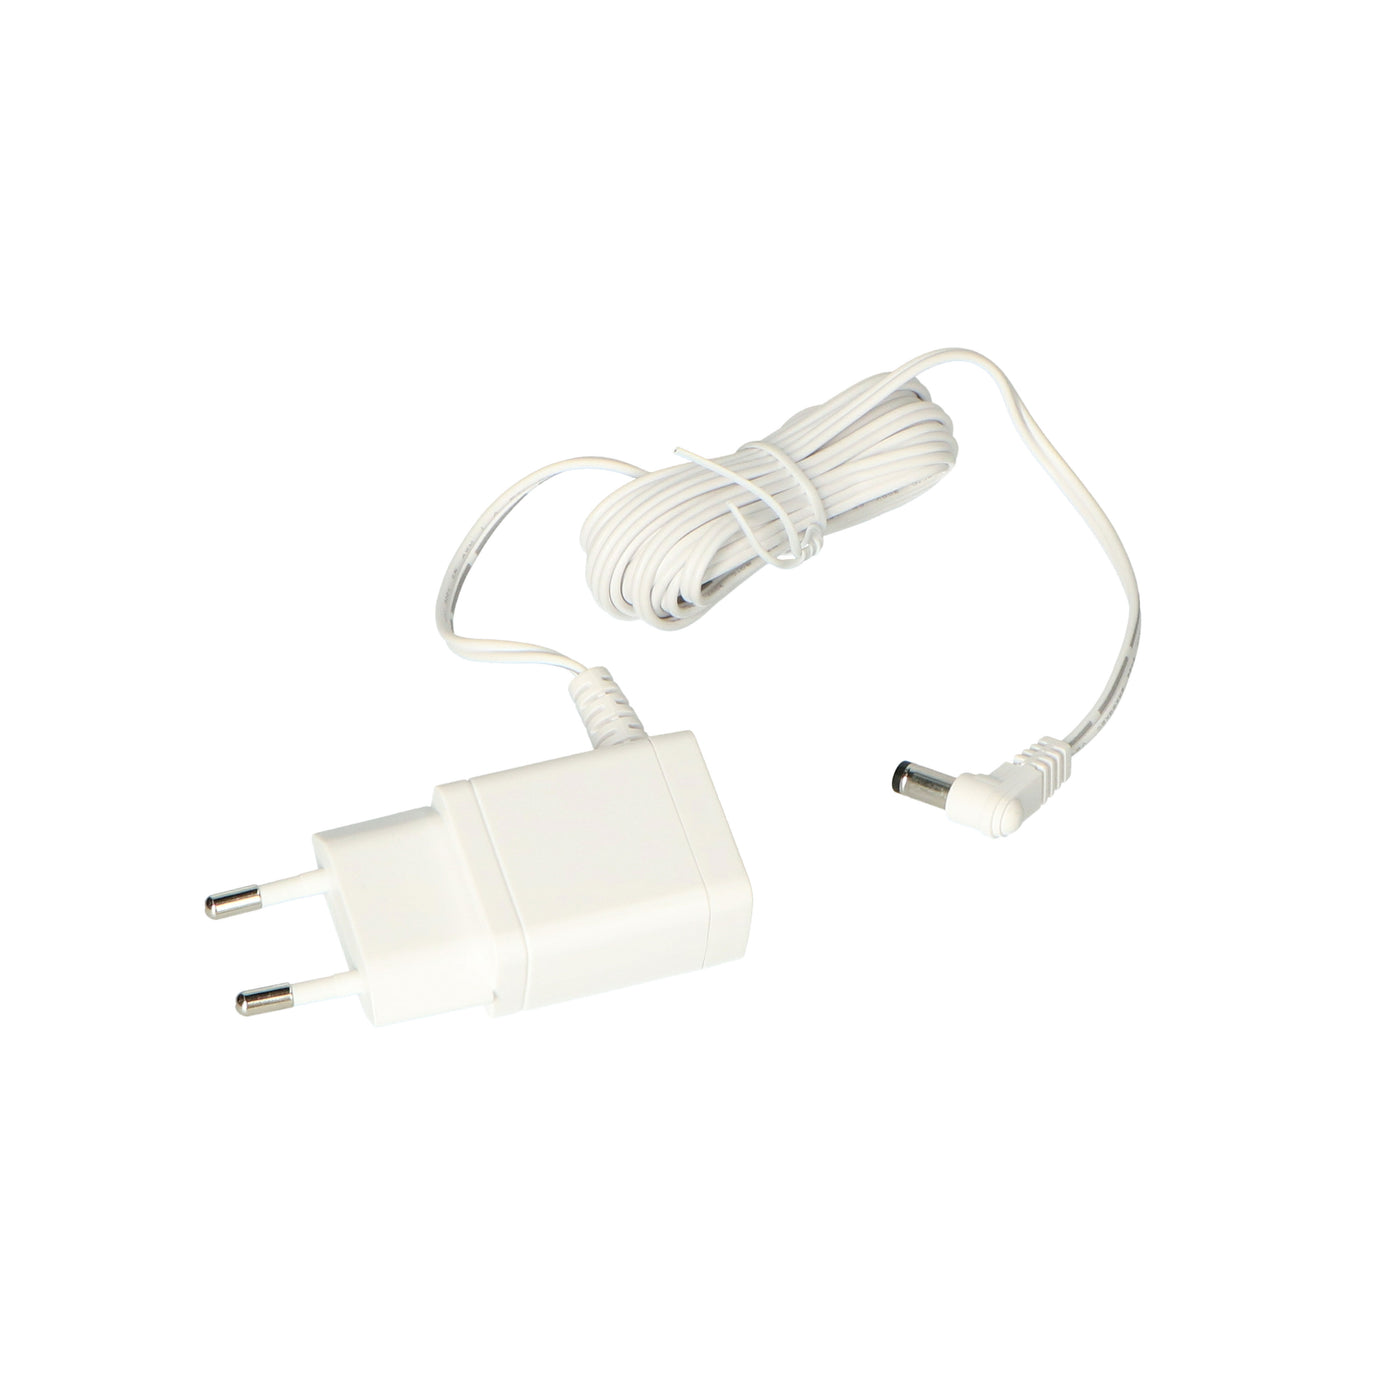 P002046 - Adapter baby unit DBX-88 ECO